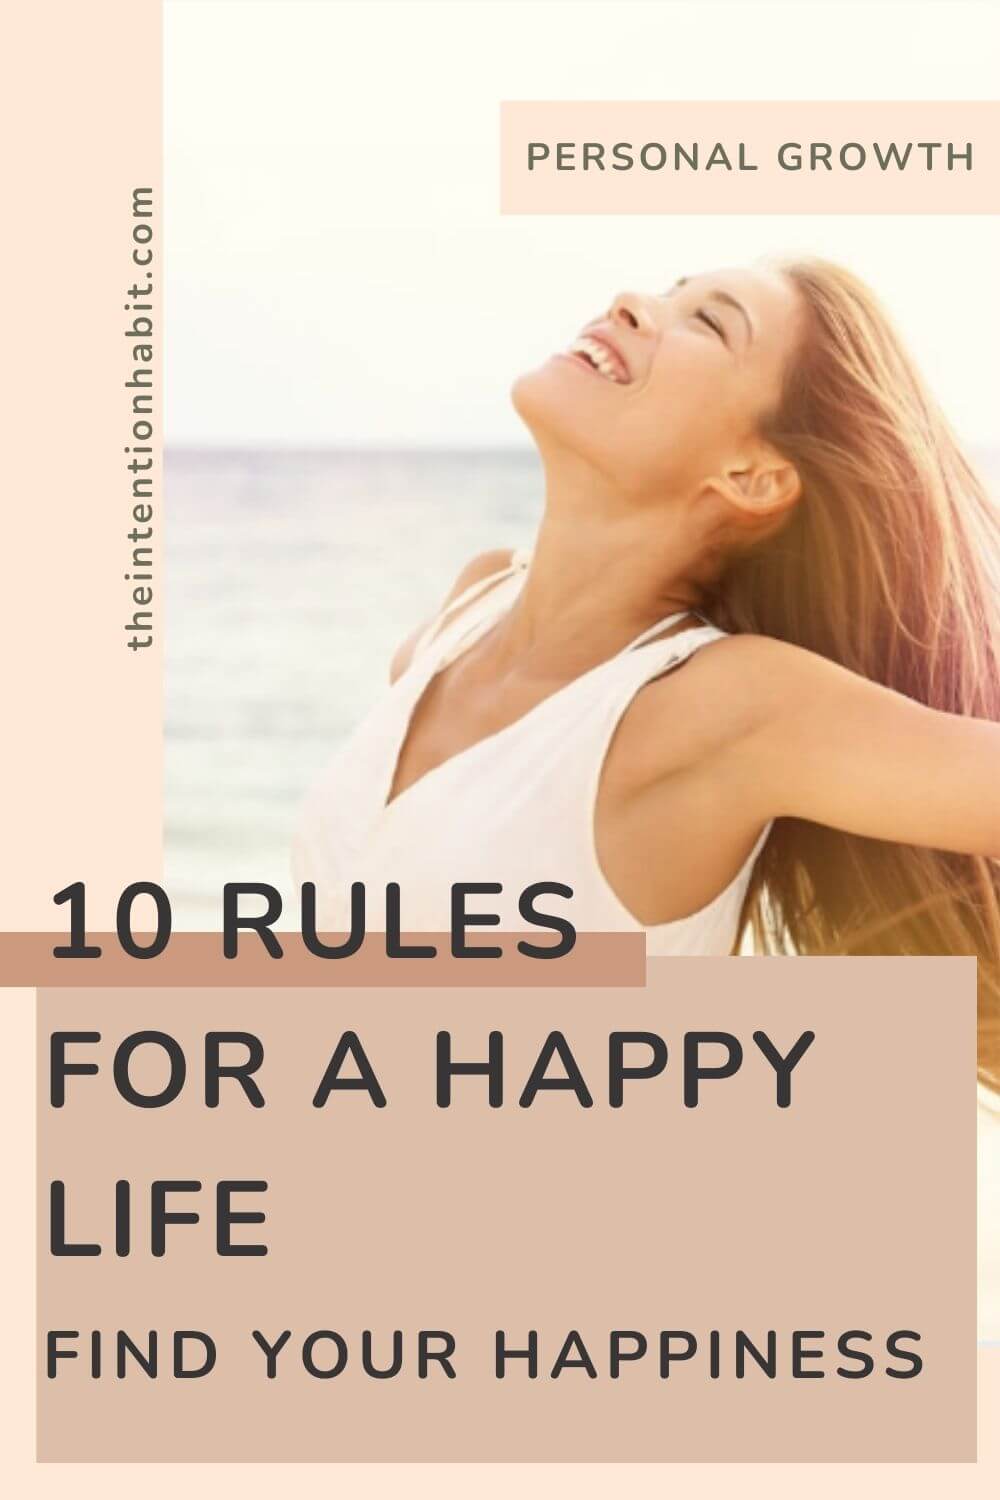 10 rules for a happy life - find your happiness